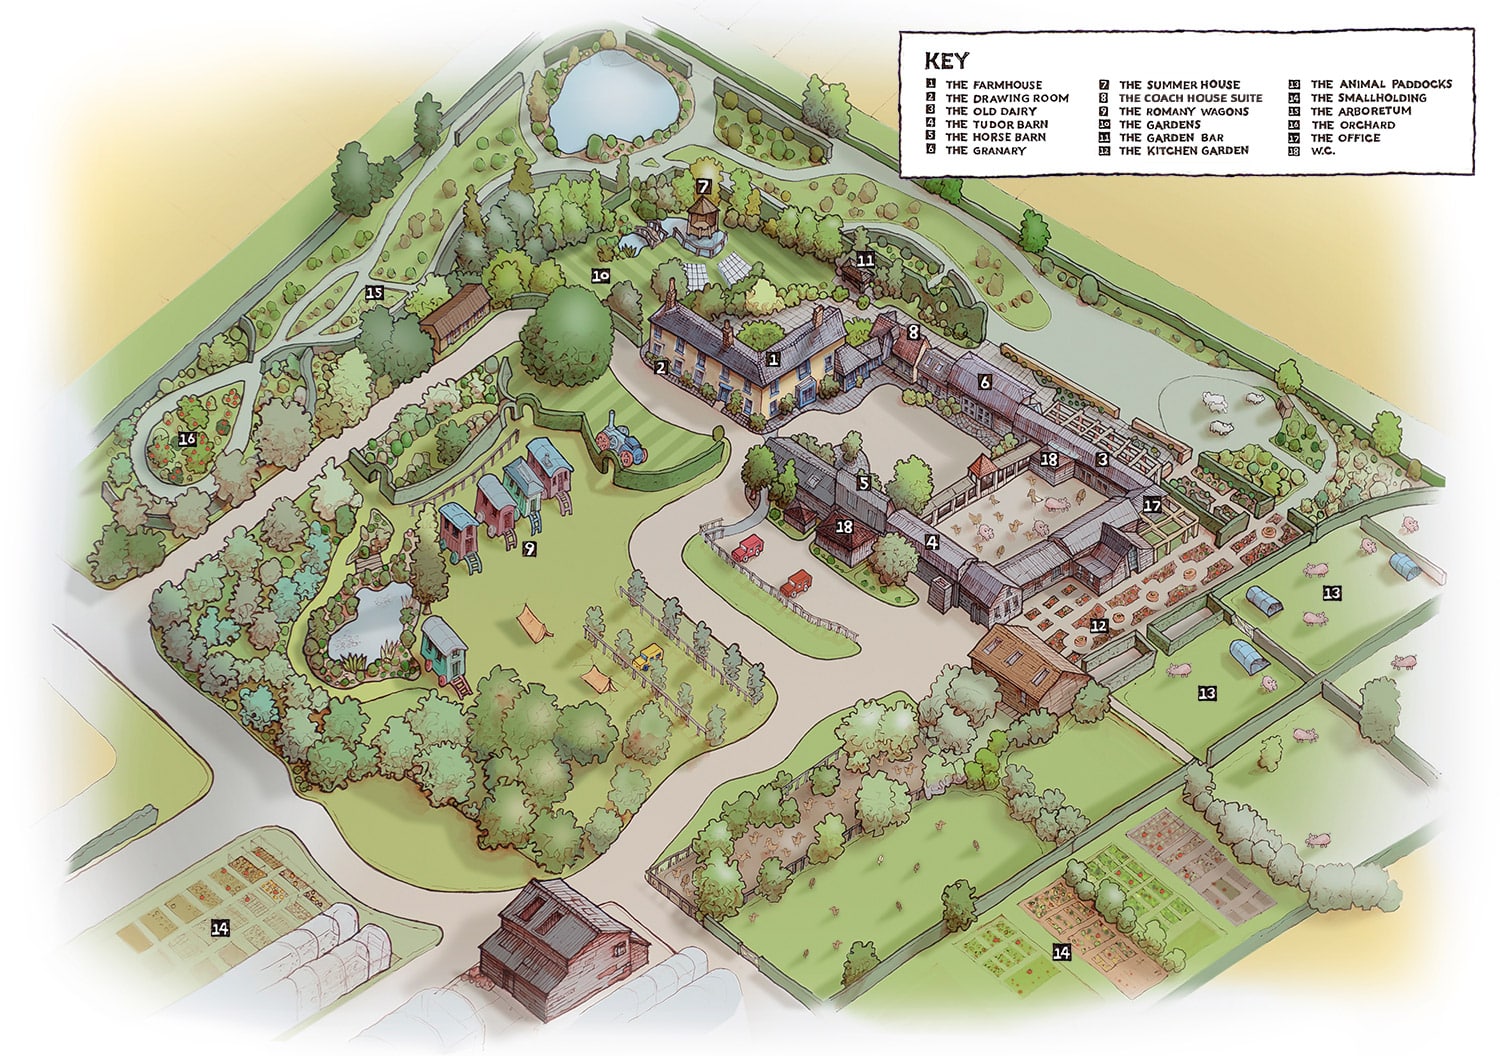 South Farm Illustrated Venue Map by Richard Bowring